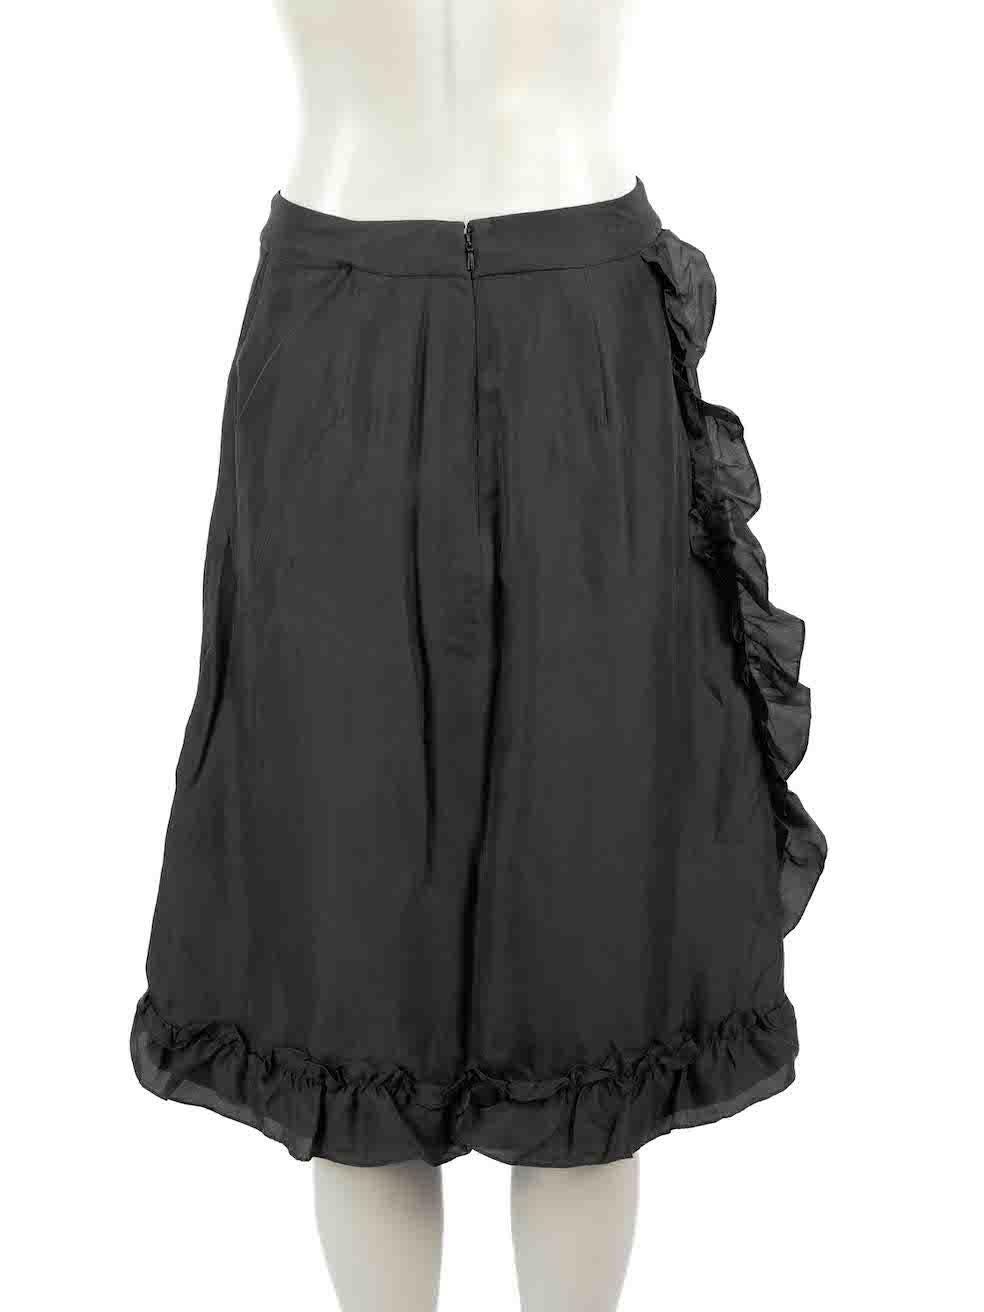 Wales Bonner Black Silk Embellished Frill Skirt Size M In New Condition For Sale In London, GB